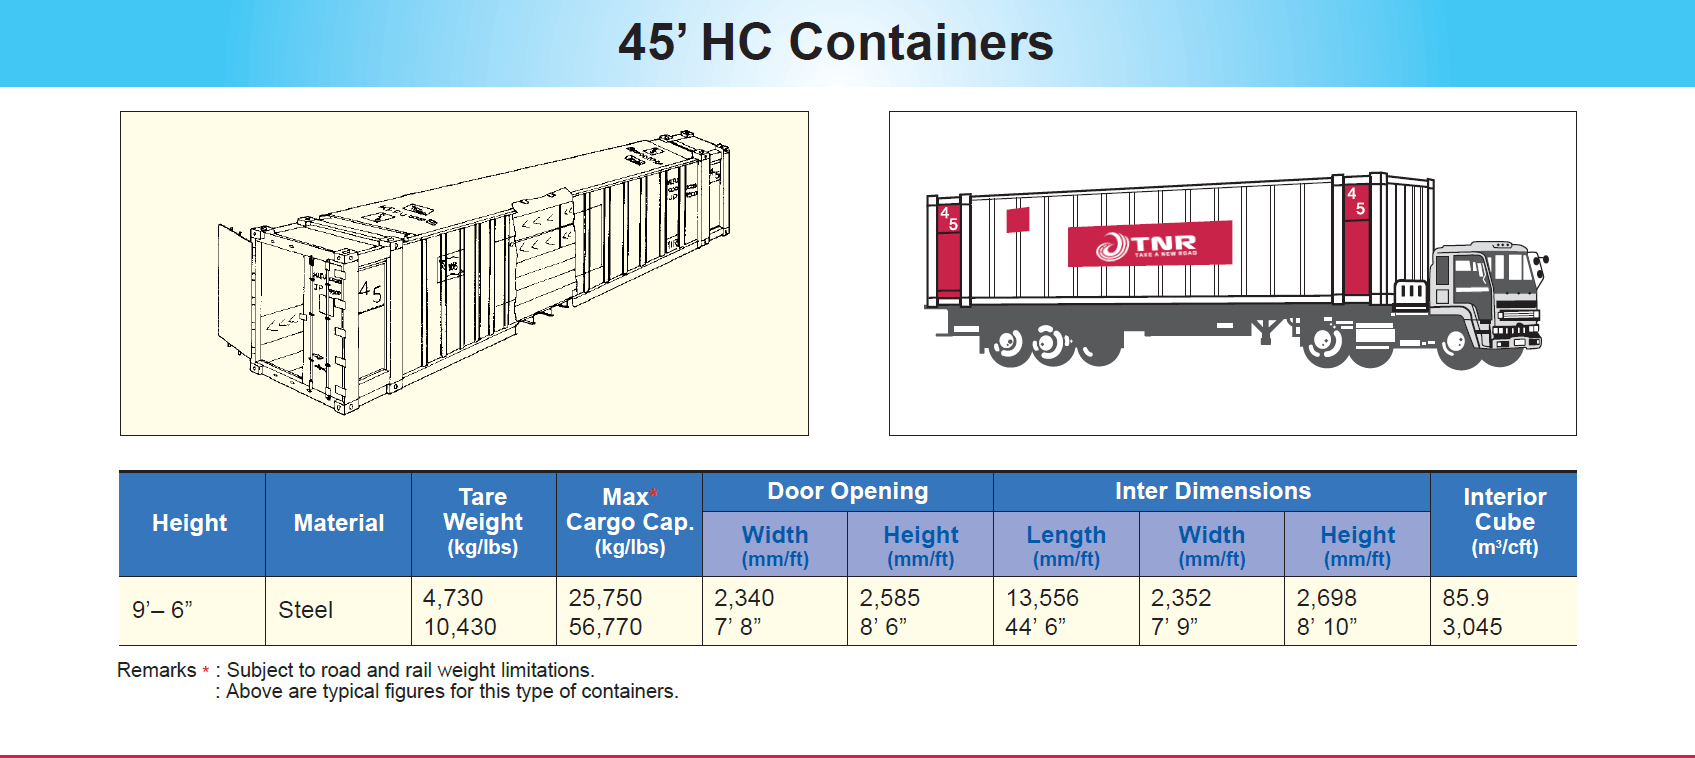 45hc container shipping